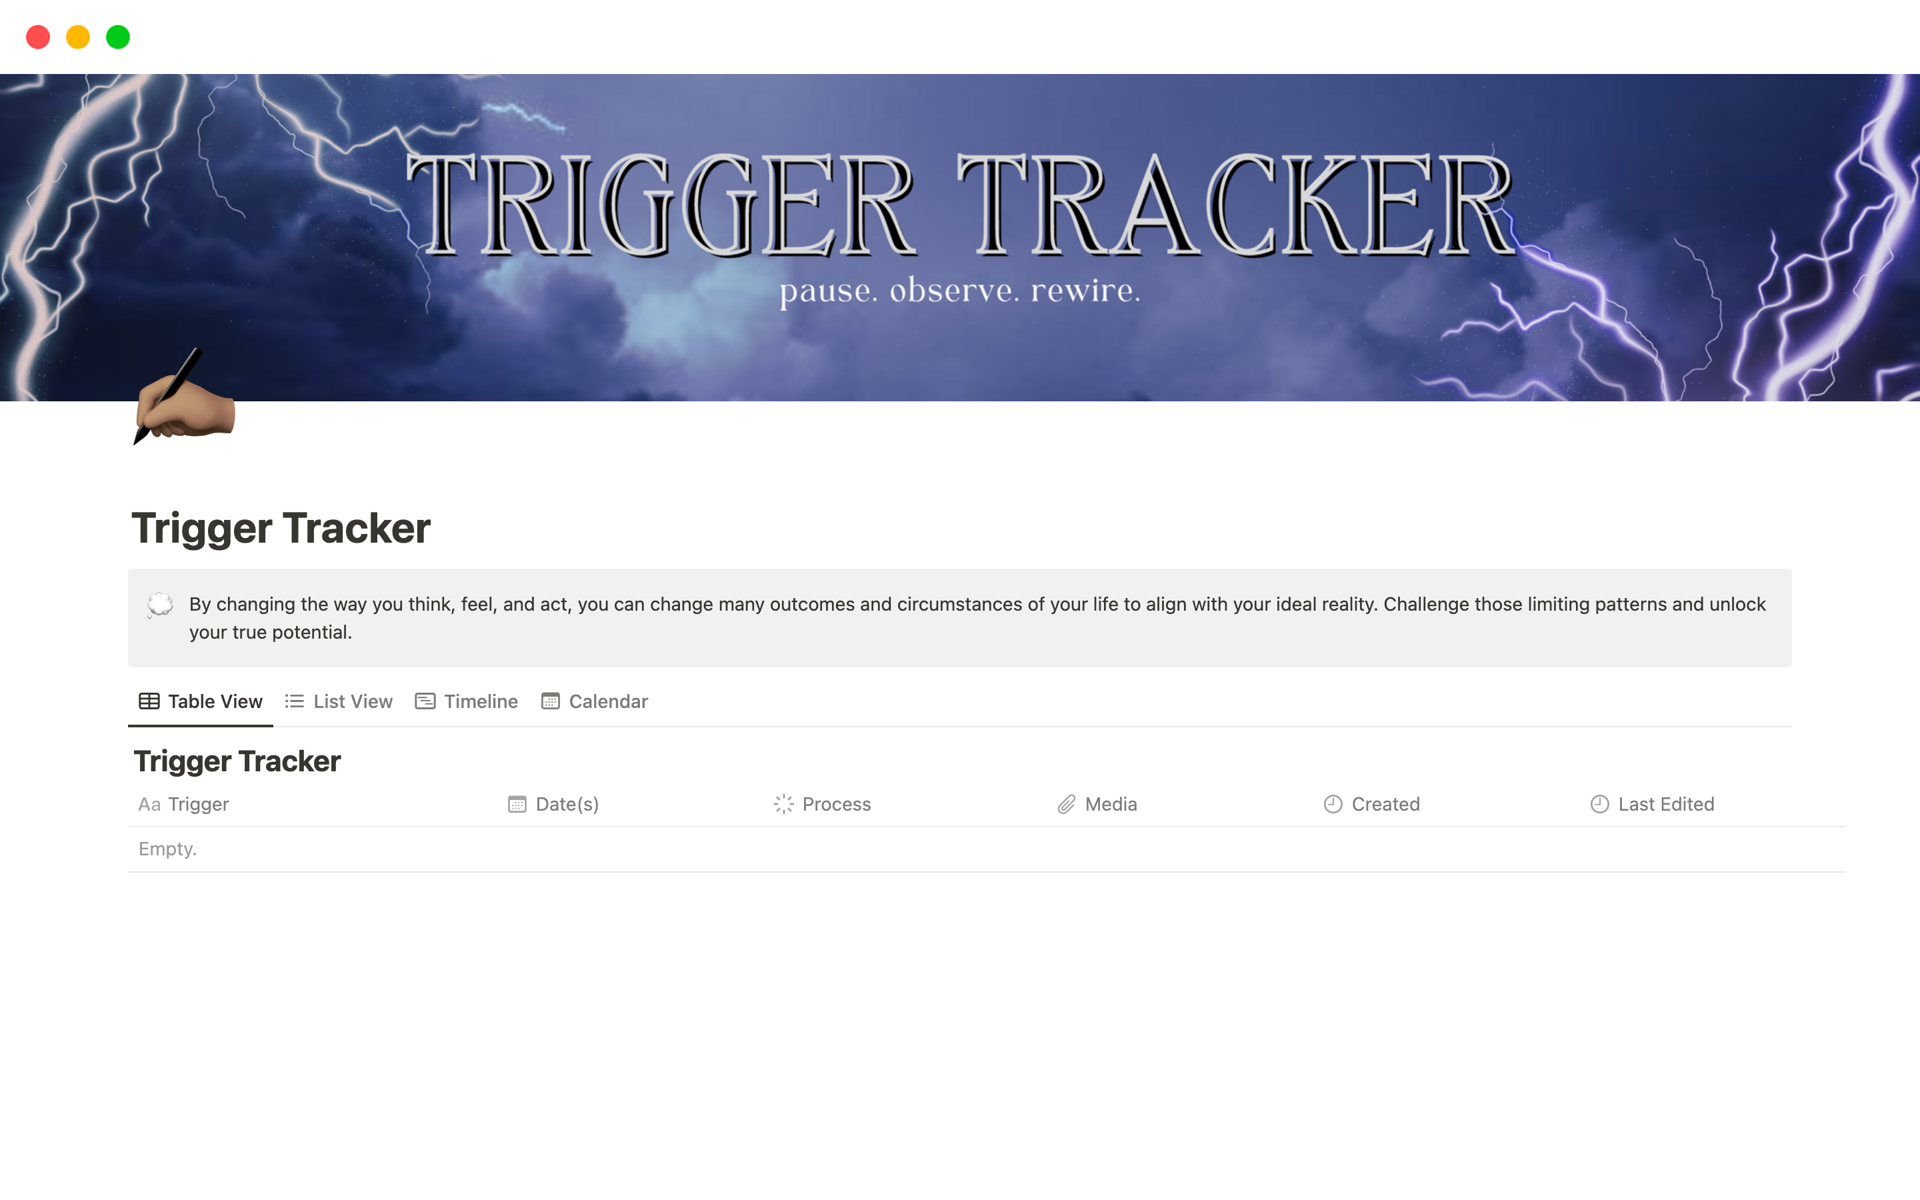 Effortlessly monitor and manage emotional triggers with this Trigger Tracker.